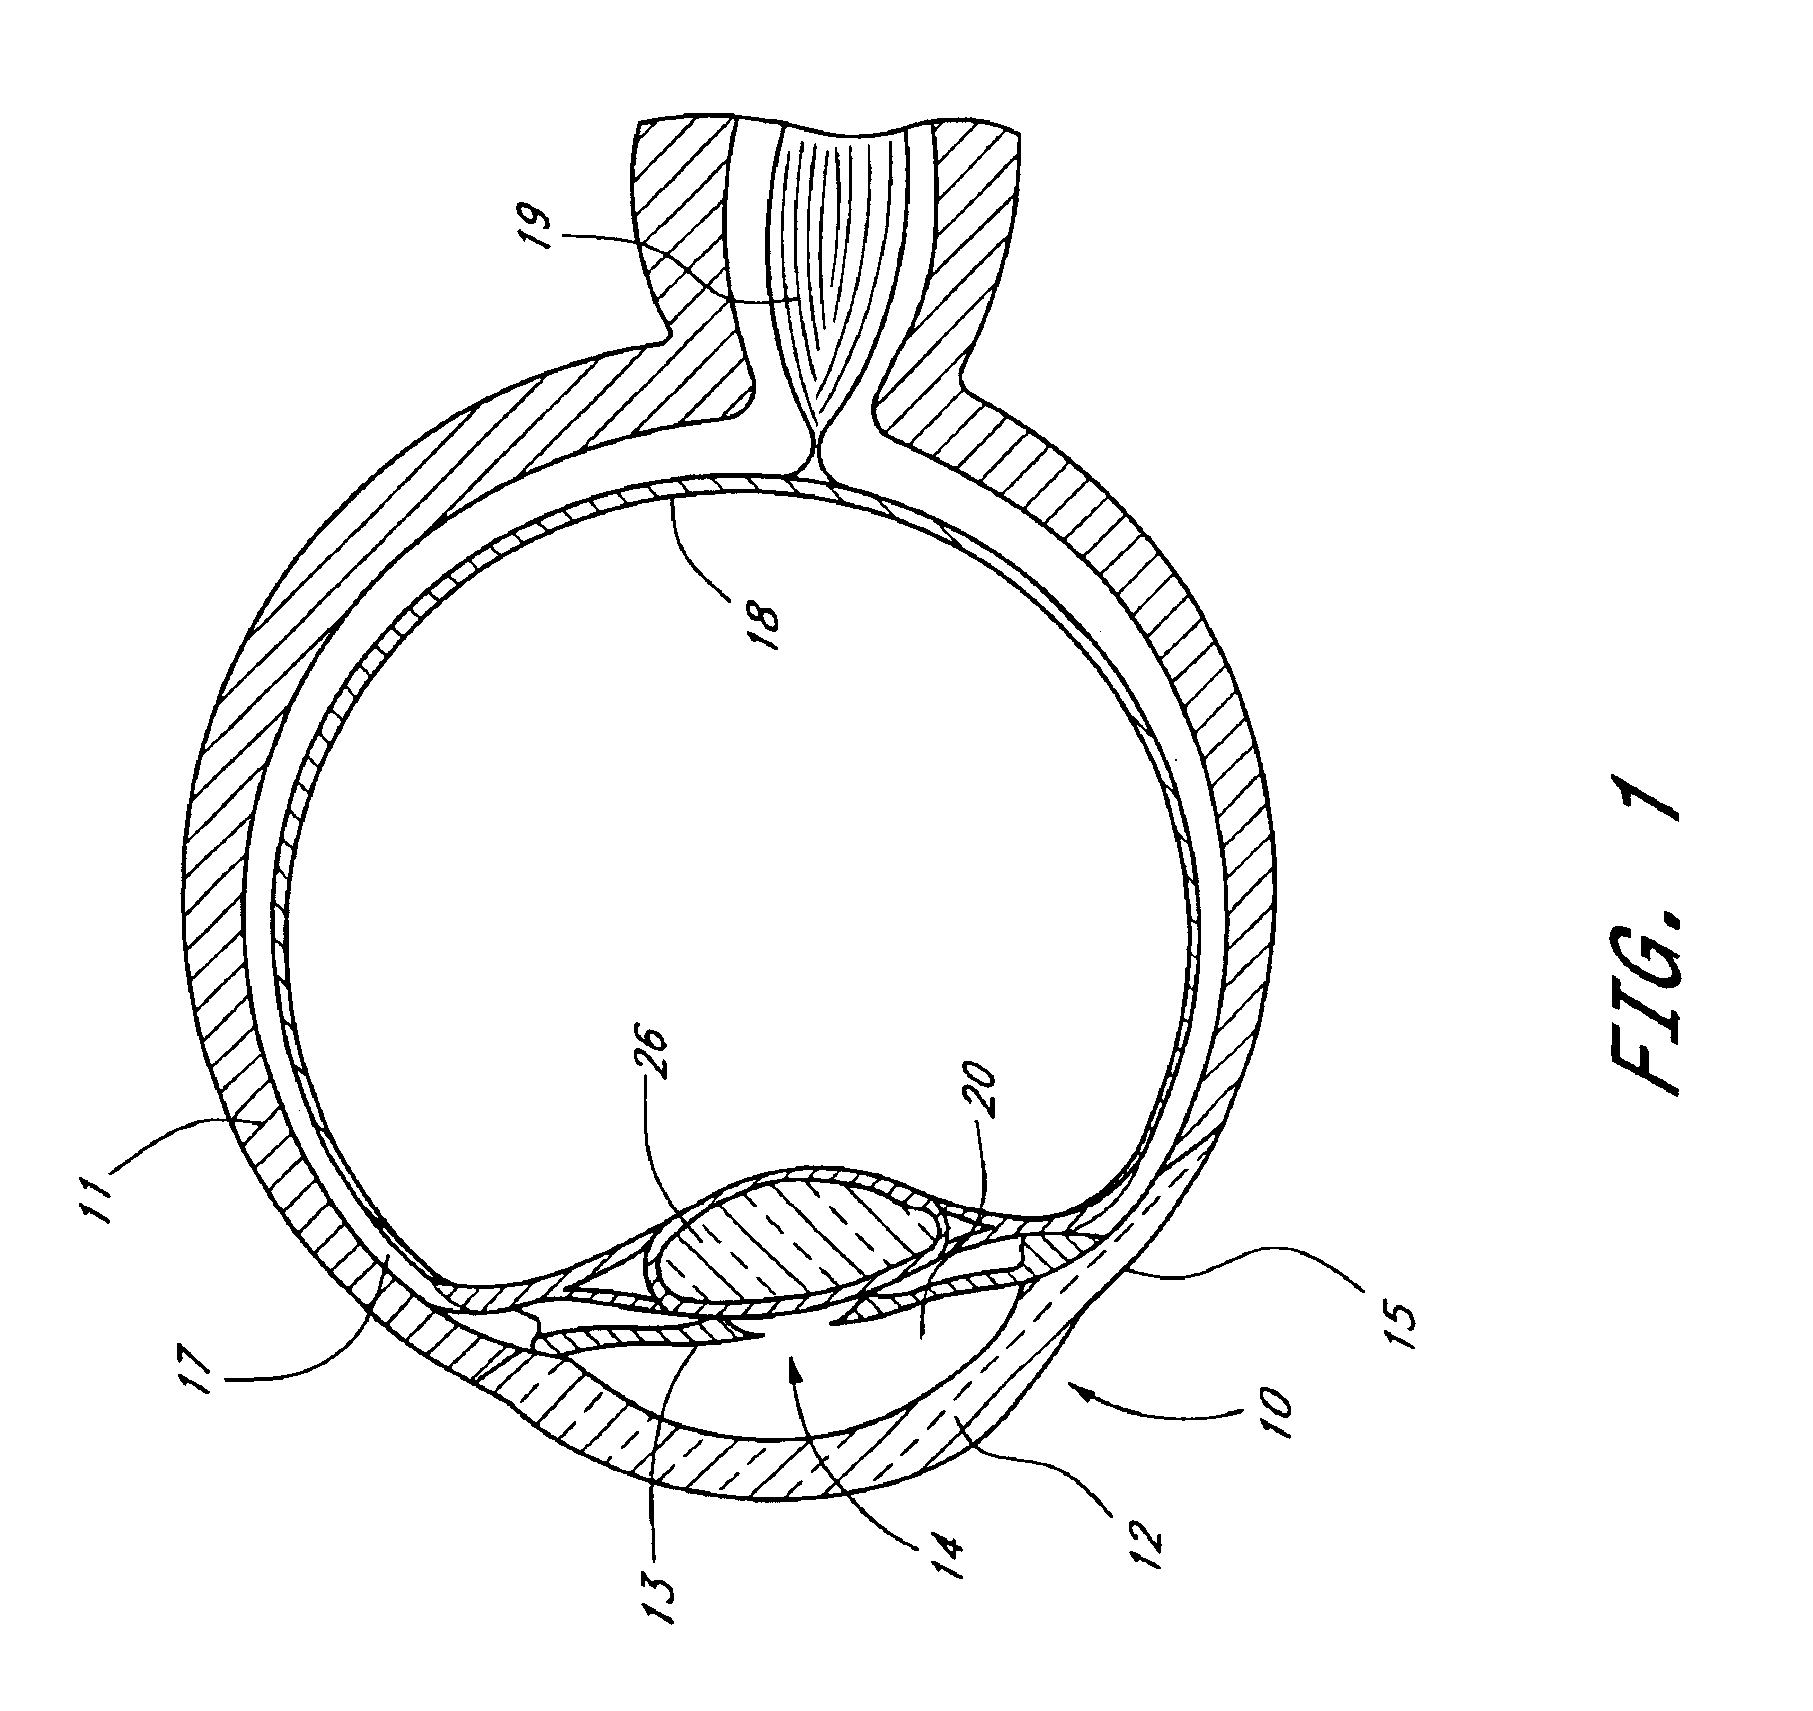 Medical device and methods of use of glaucoma treatment